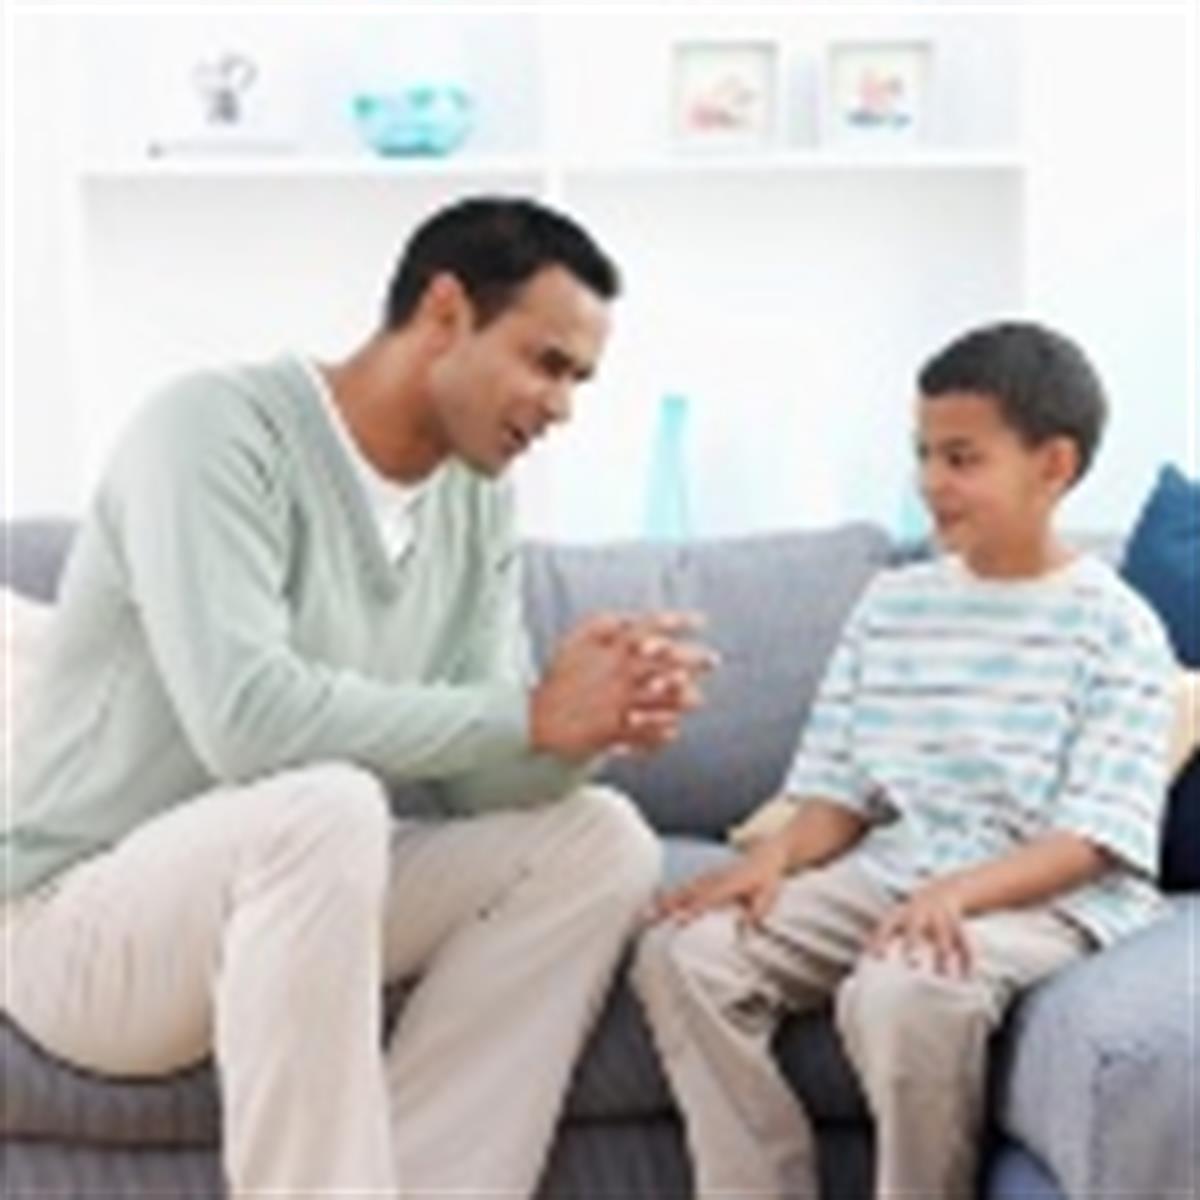 Sex 12ag Boys Videos - Talking to Your Child About Sex - HealthyChildren.org